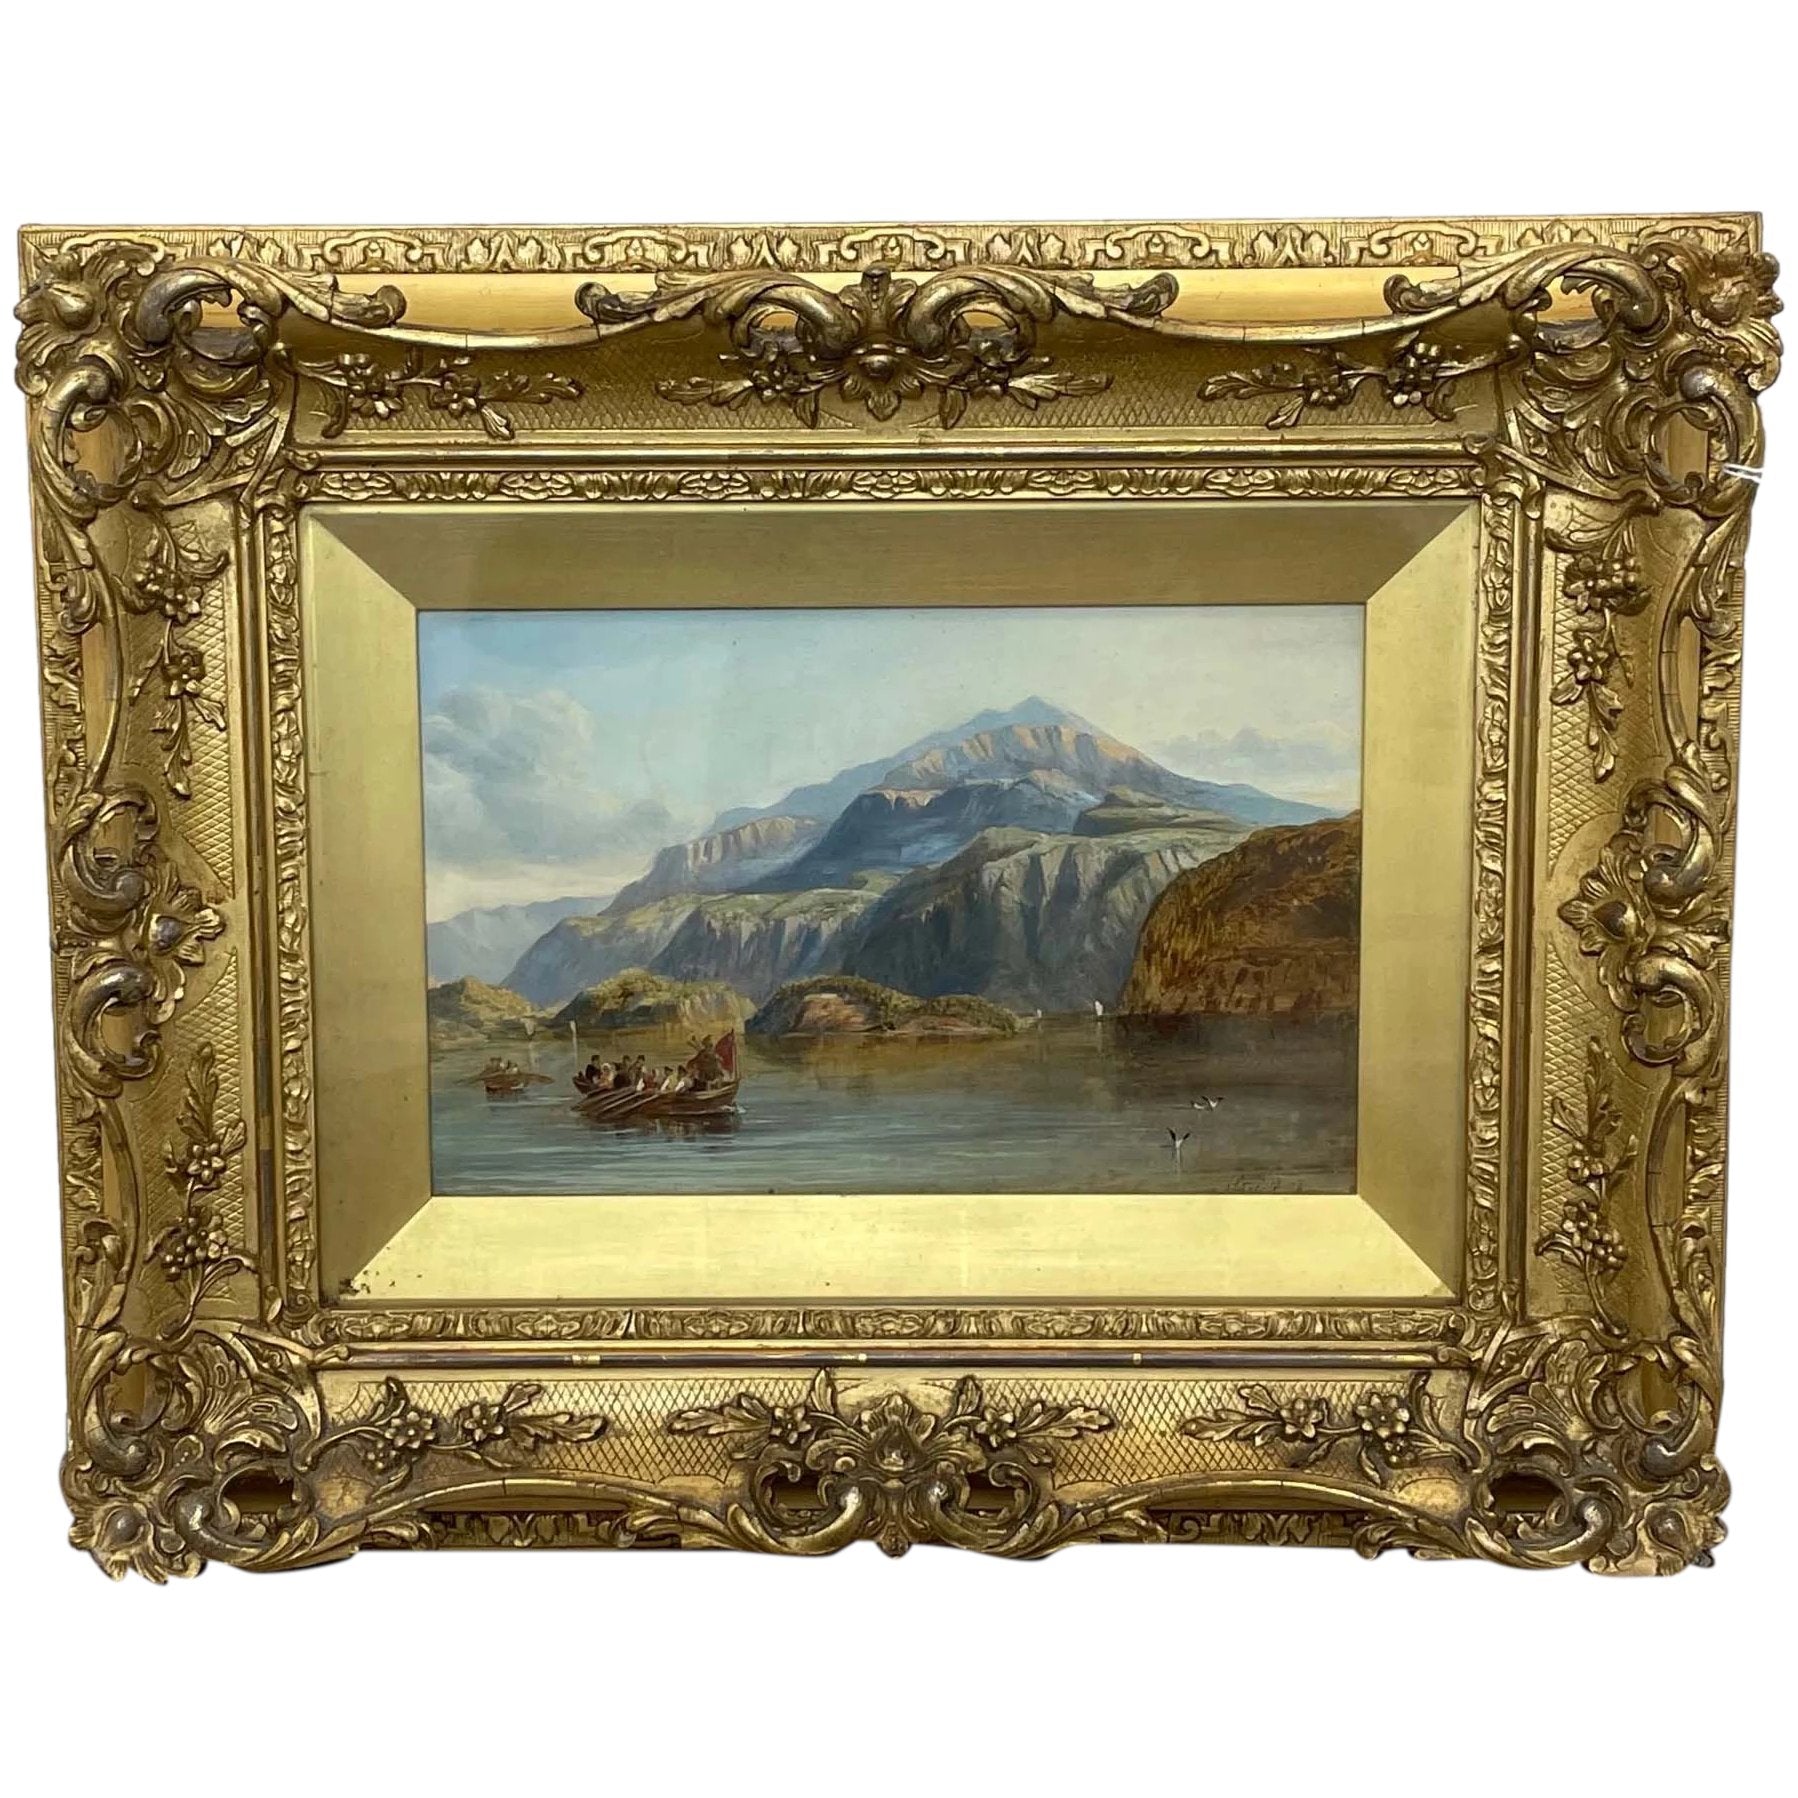 19th Century Oil Painting "Bonnie Prince Charlie Crossing To Skye" - Cheshire Antiques Consultant